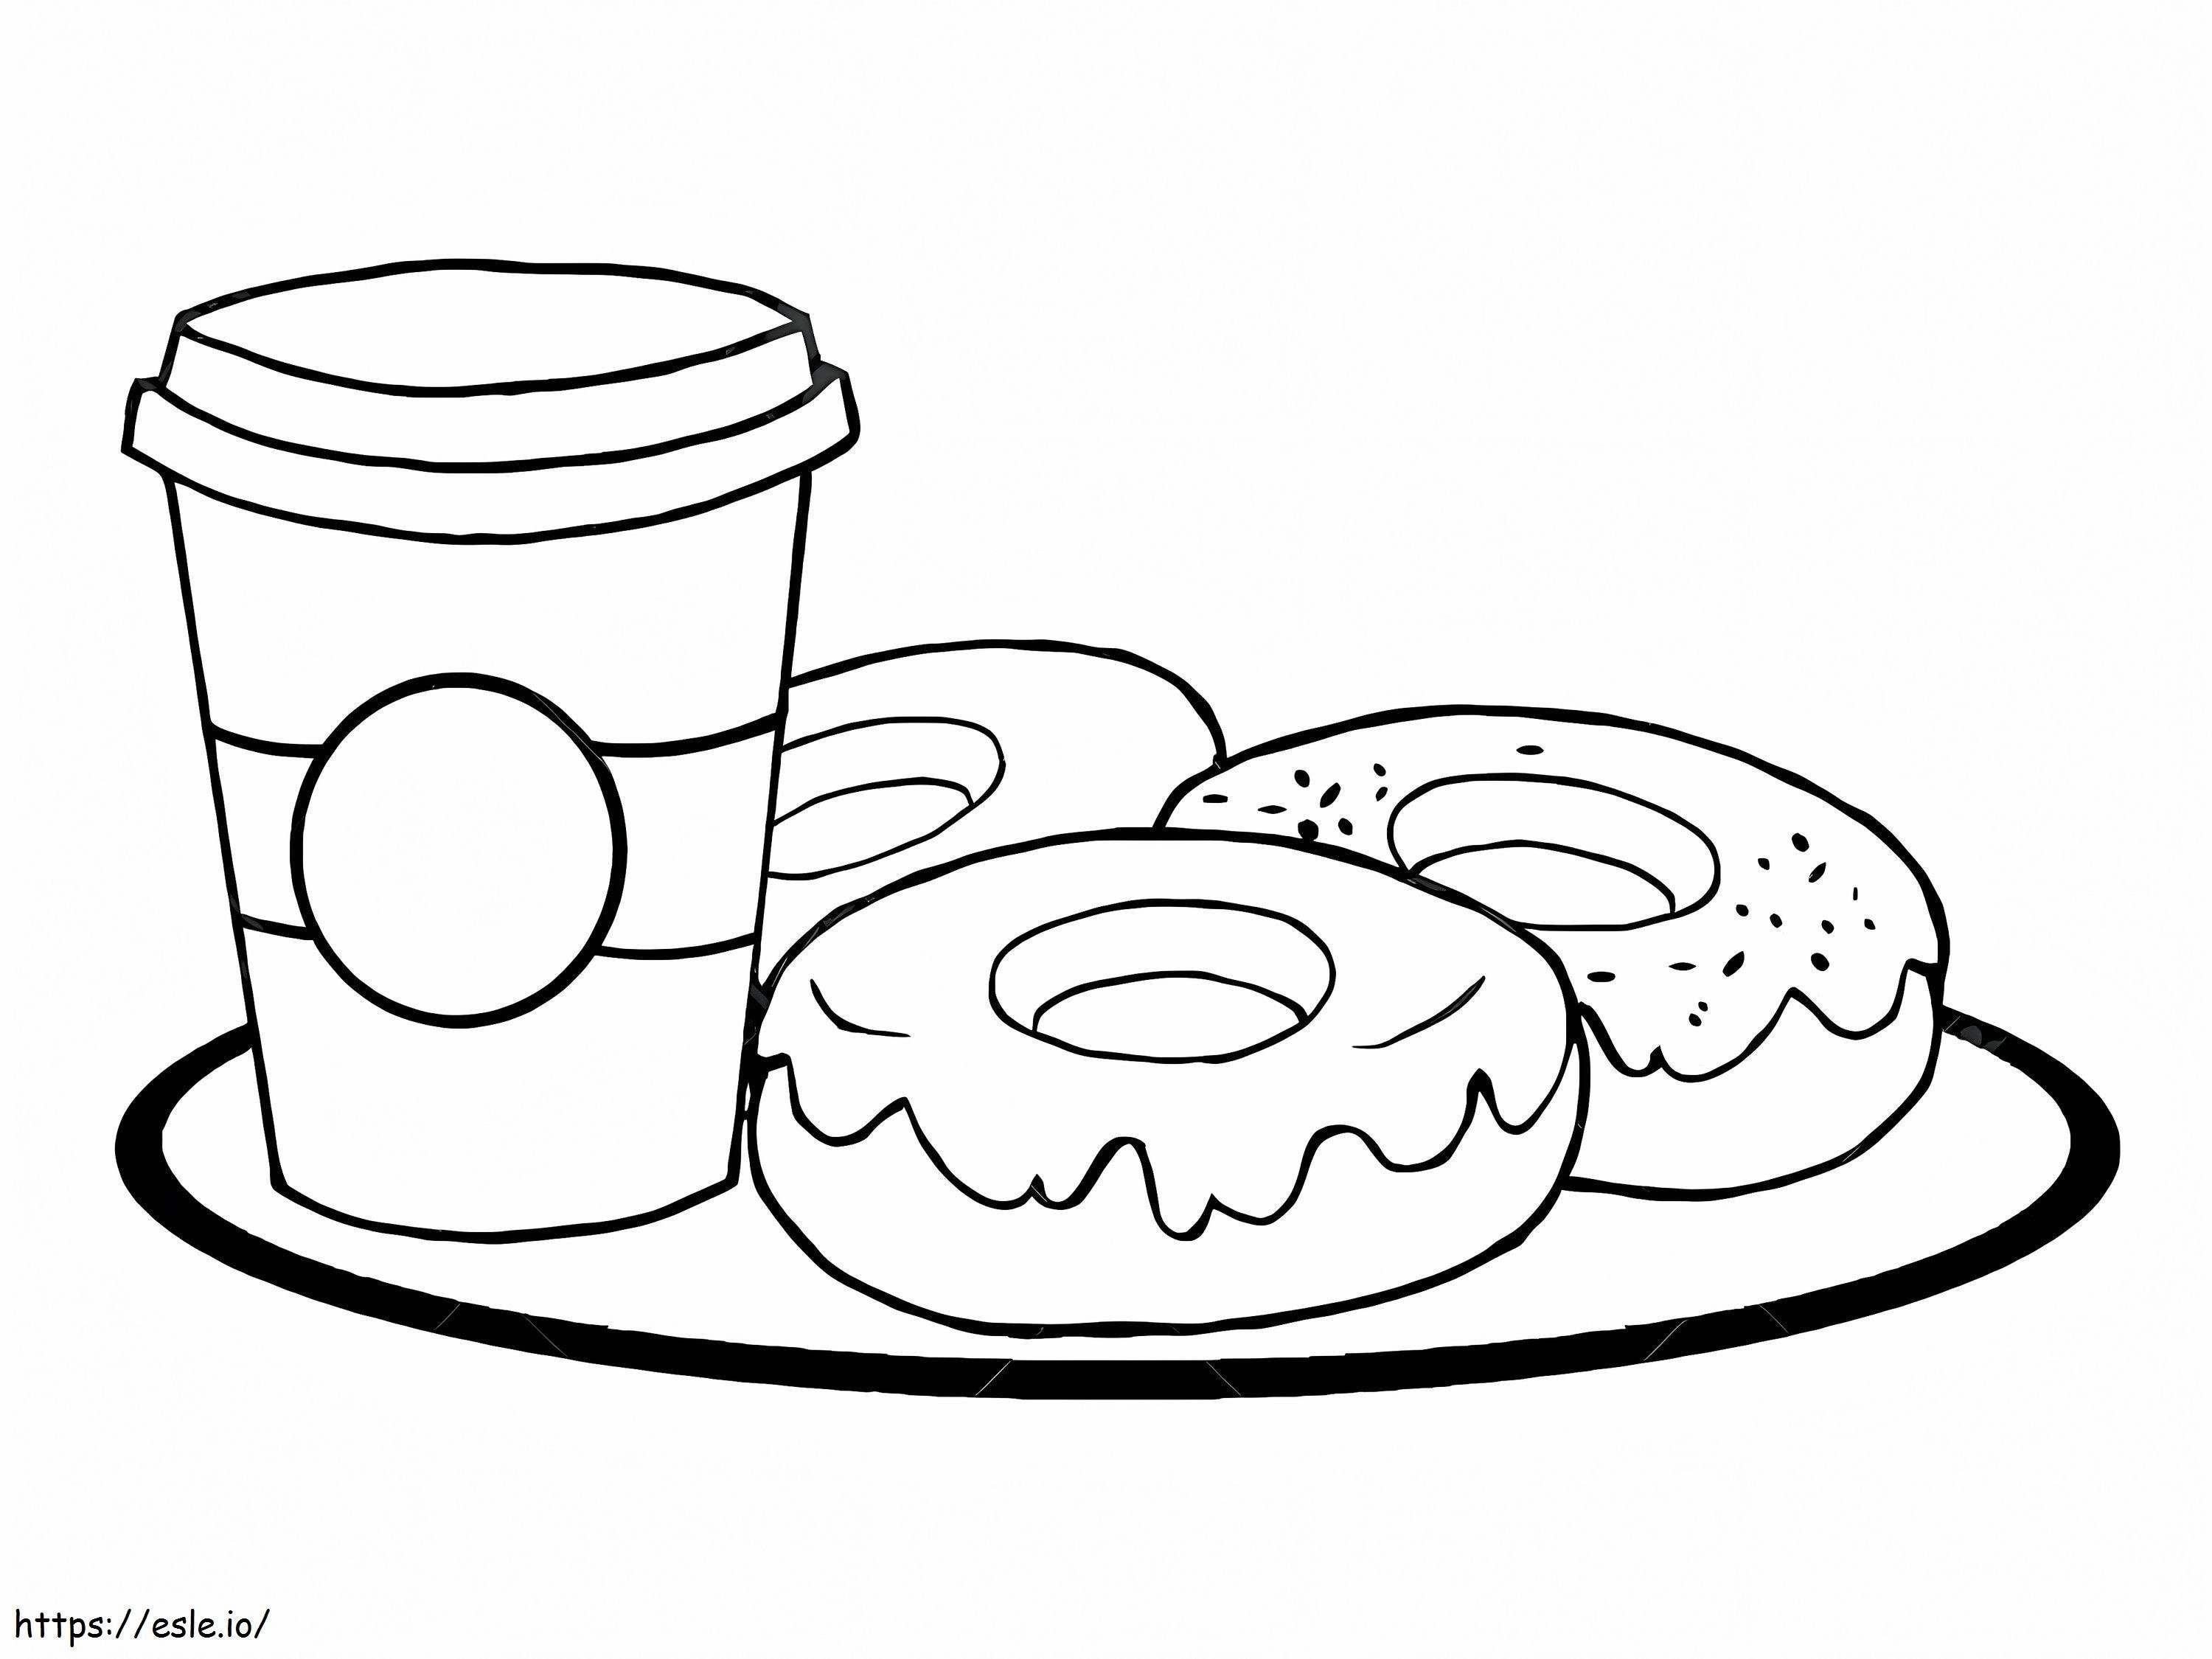 Three Donuts And Drink coloring page